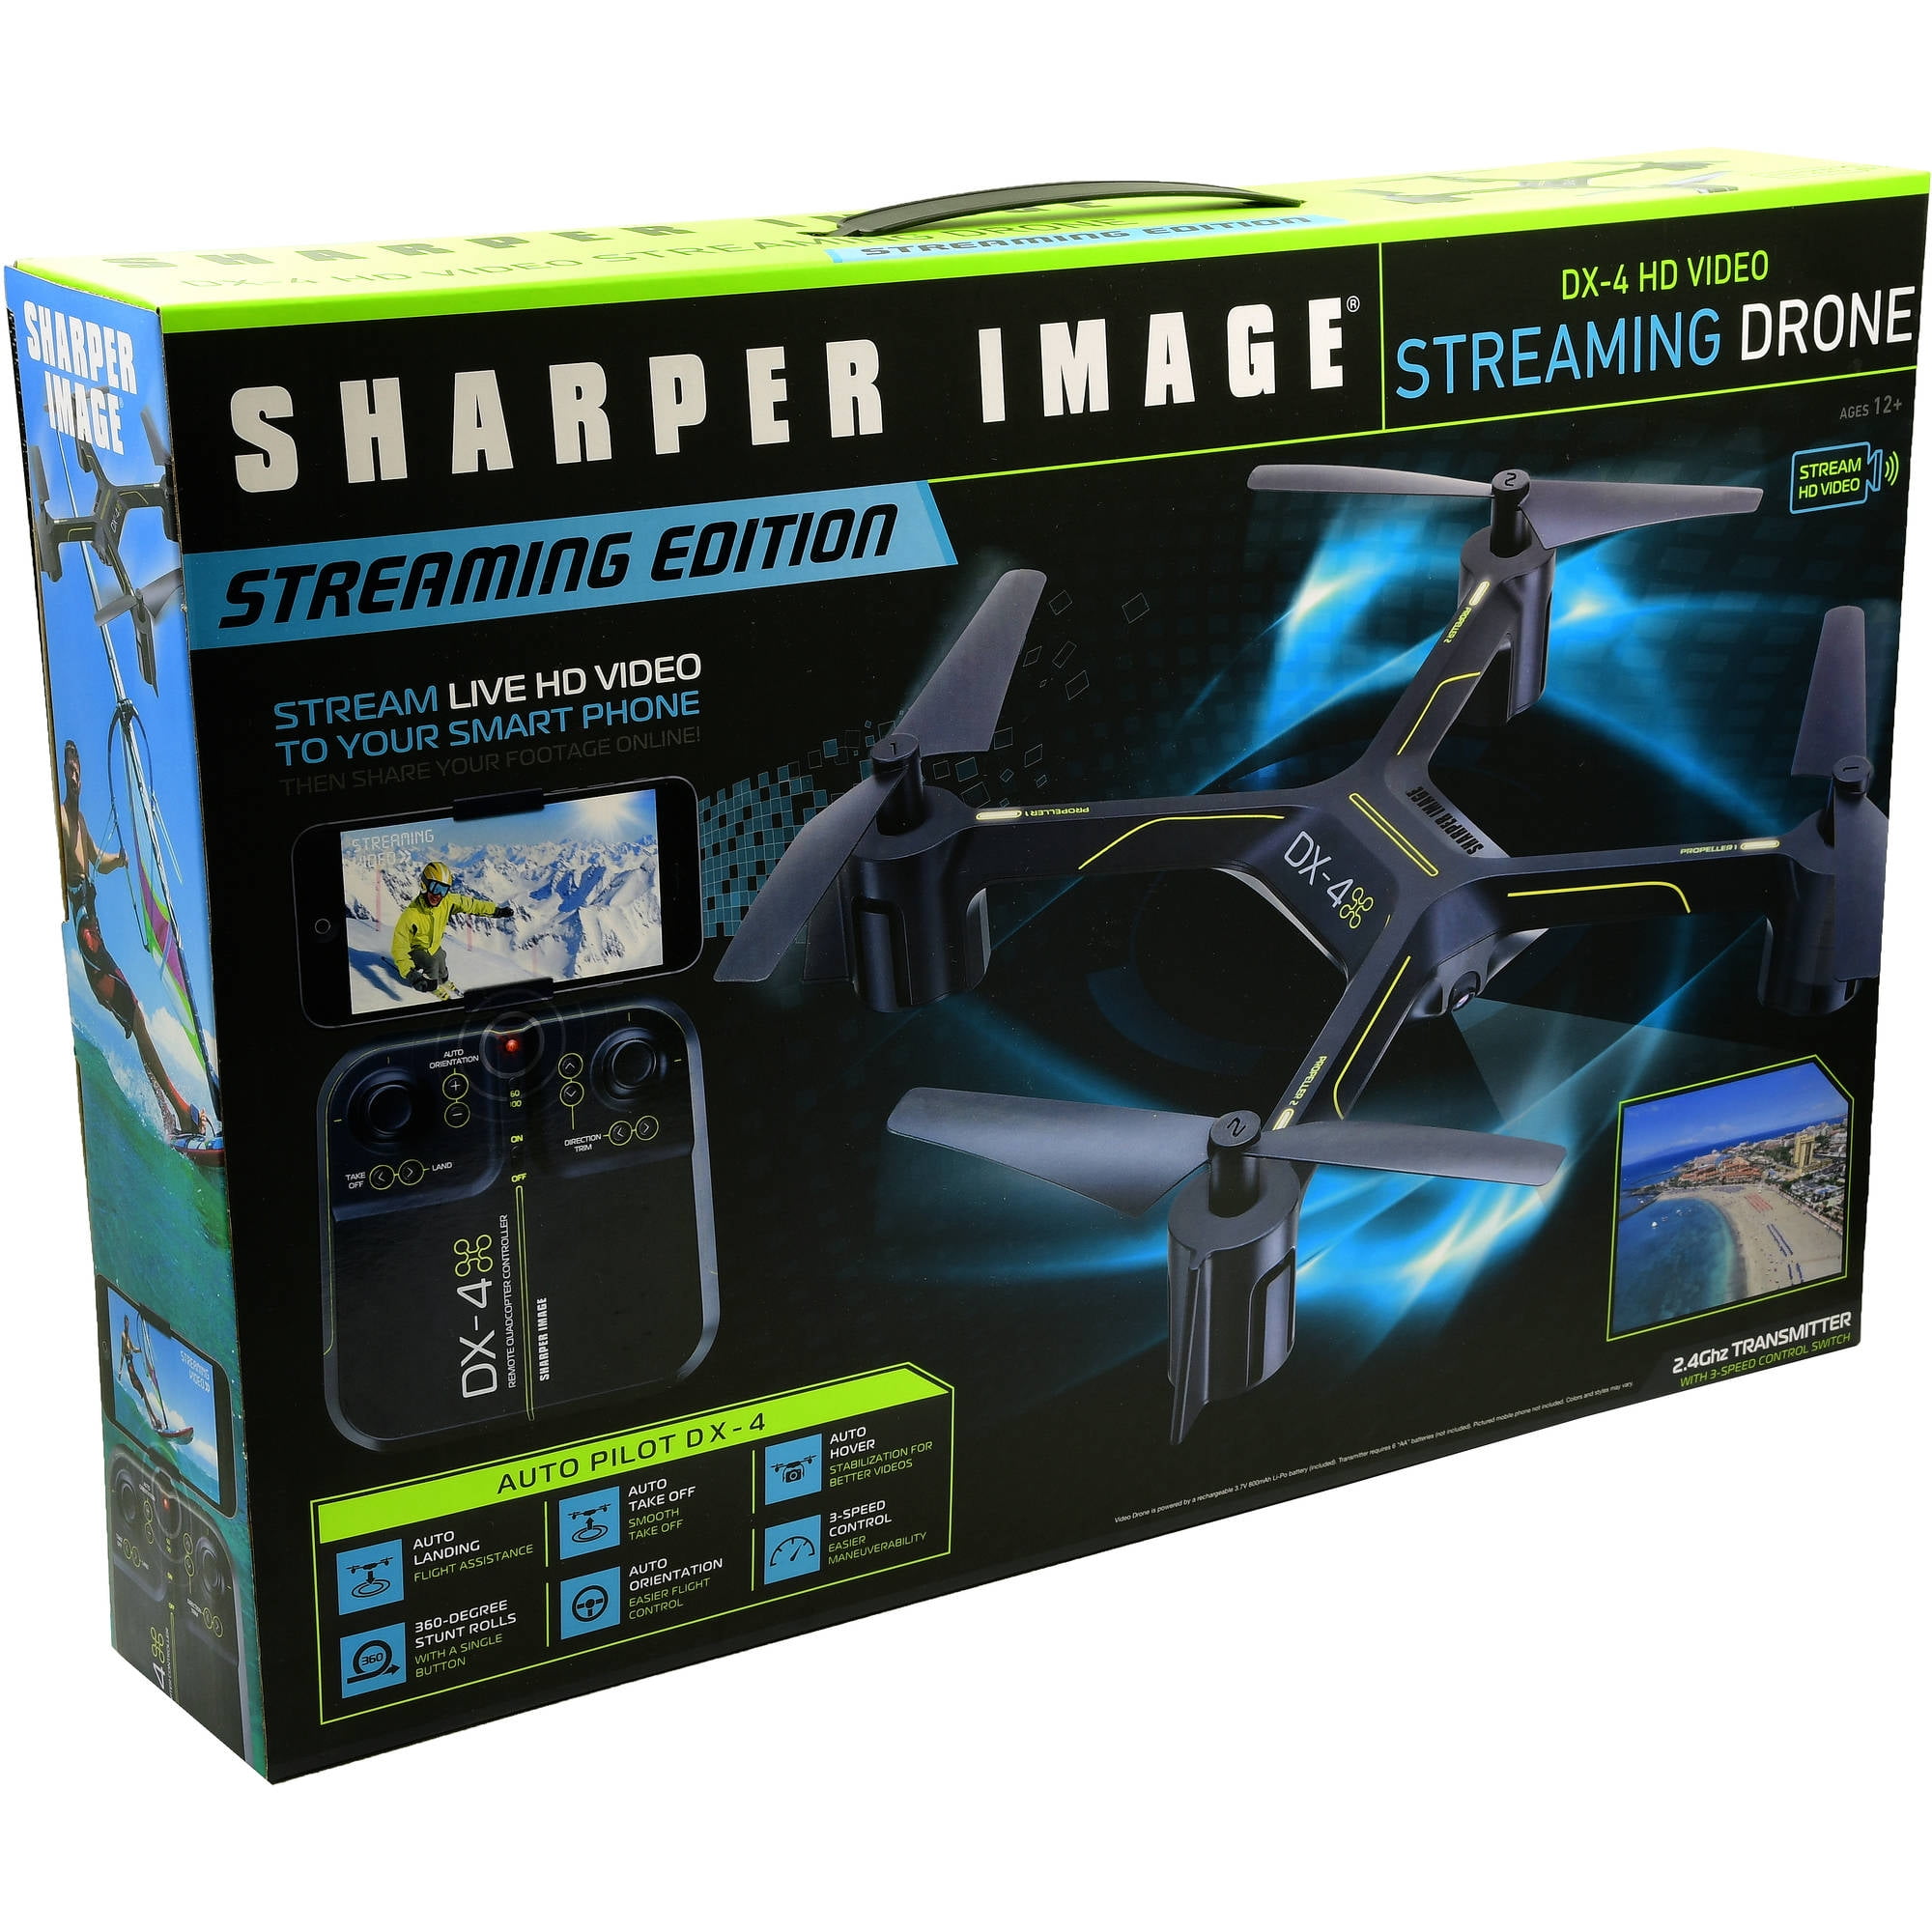 SHARPER IMAGE DX-4 VIDEO STREAMING DRONE REPLACEMENT PARTS remote control